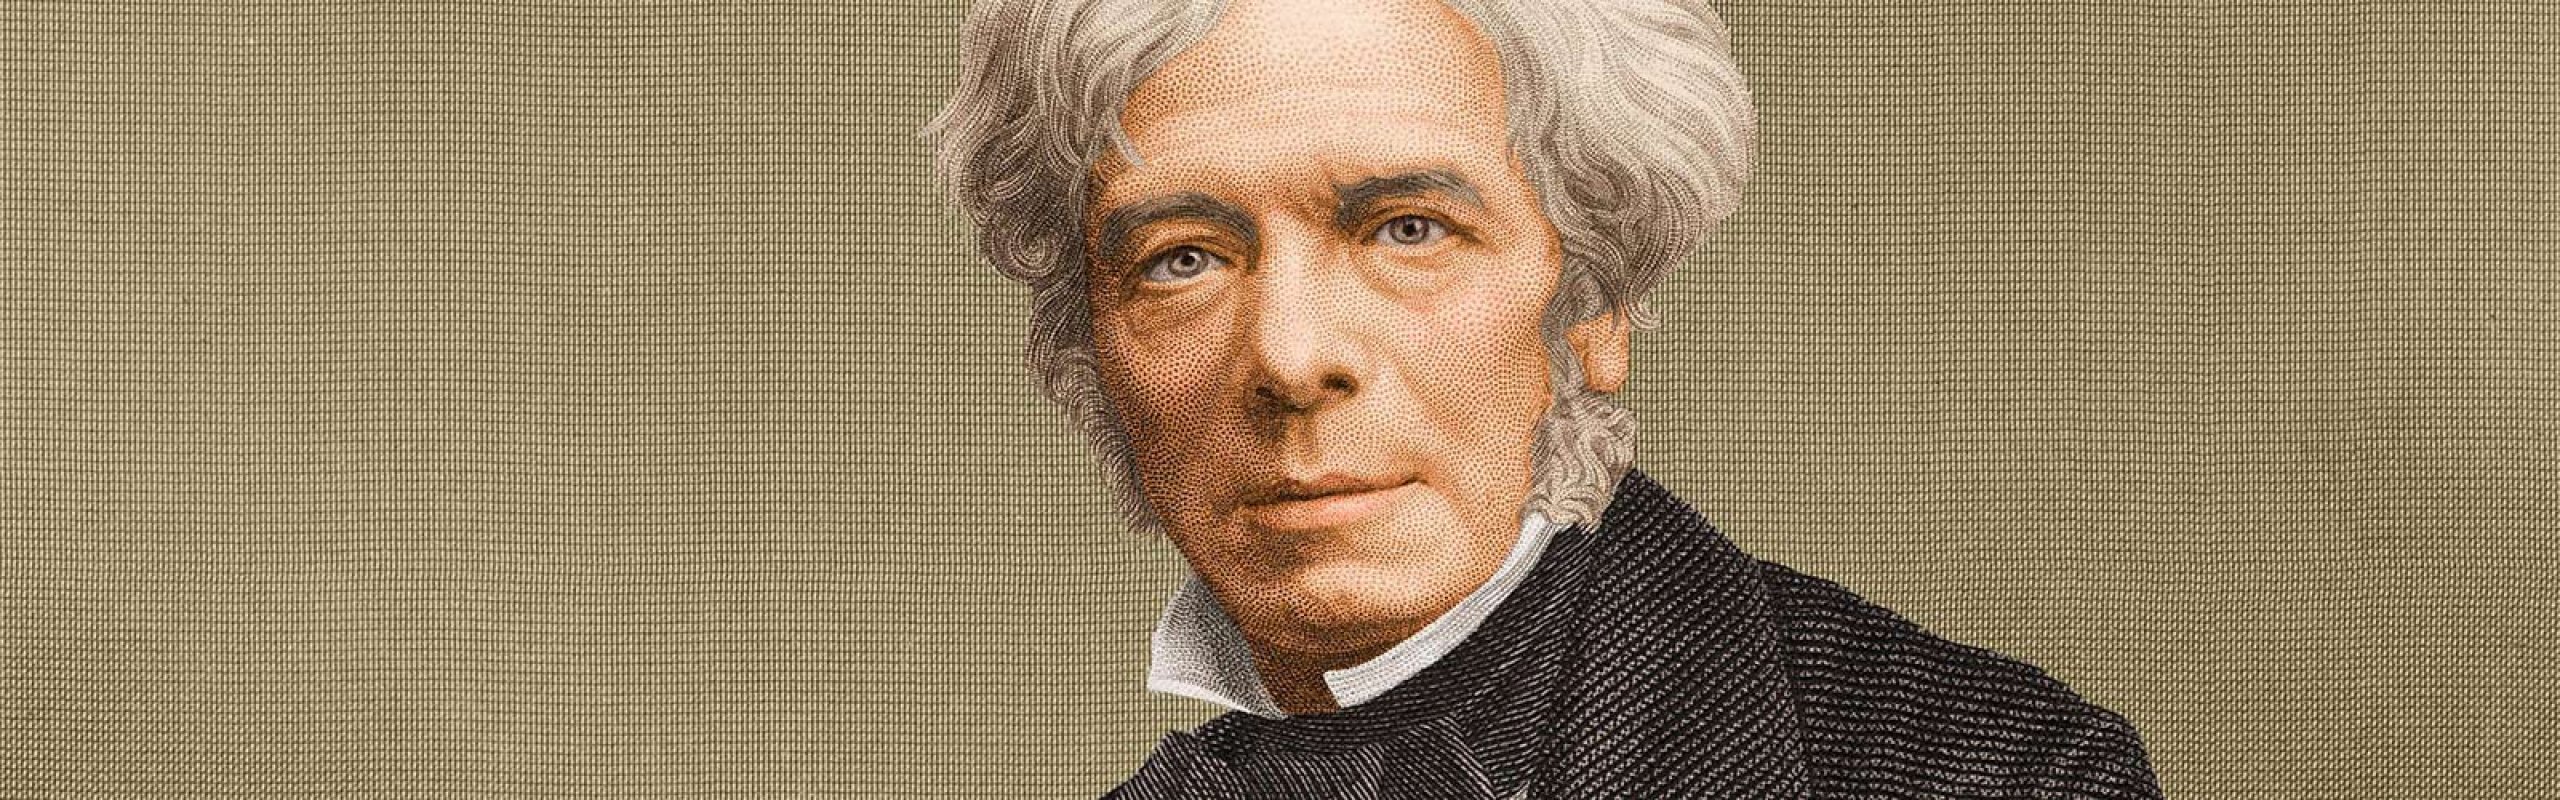 The character, legacy and genius of Michael Faraday